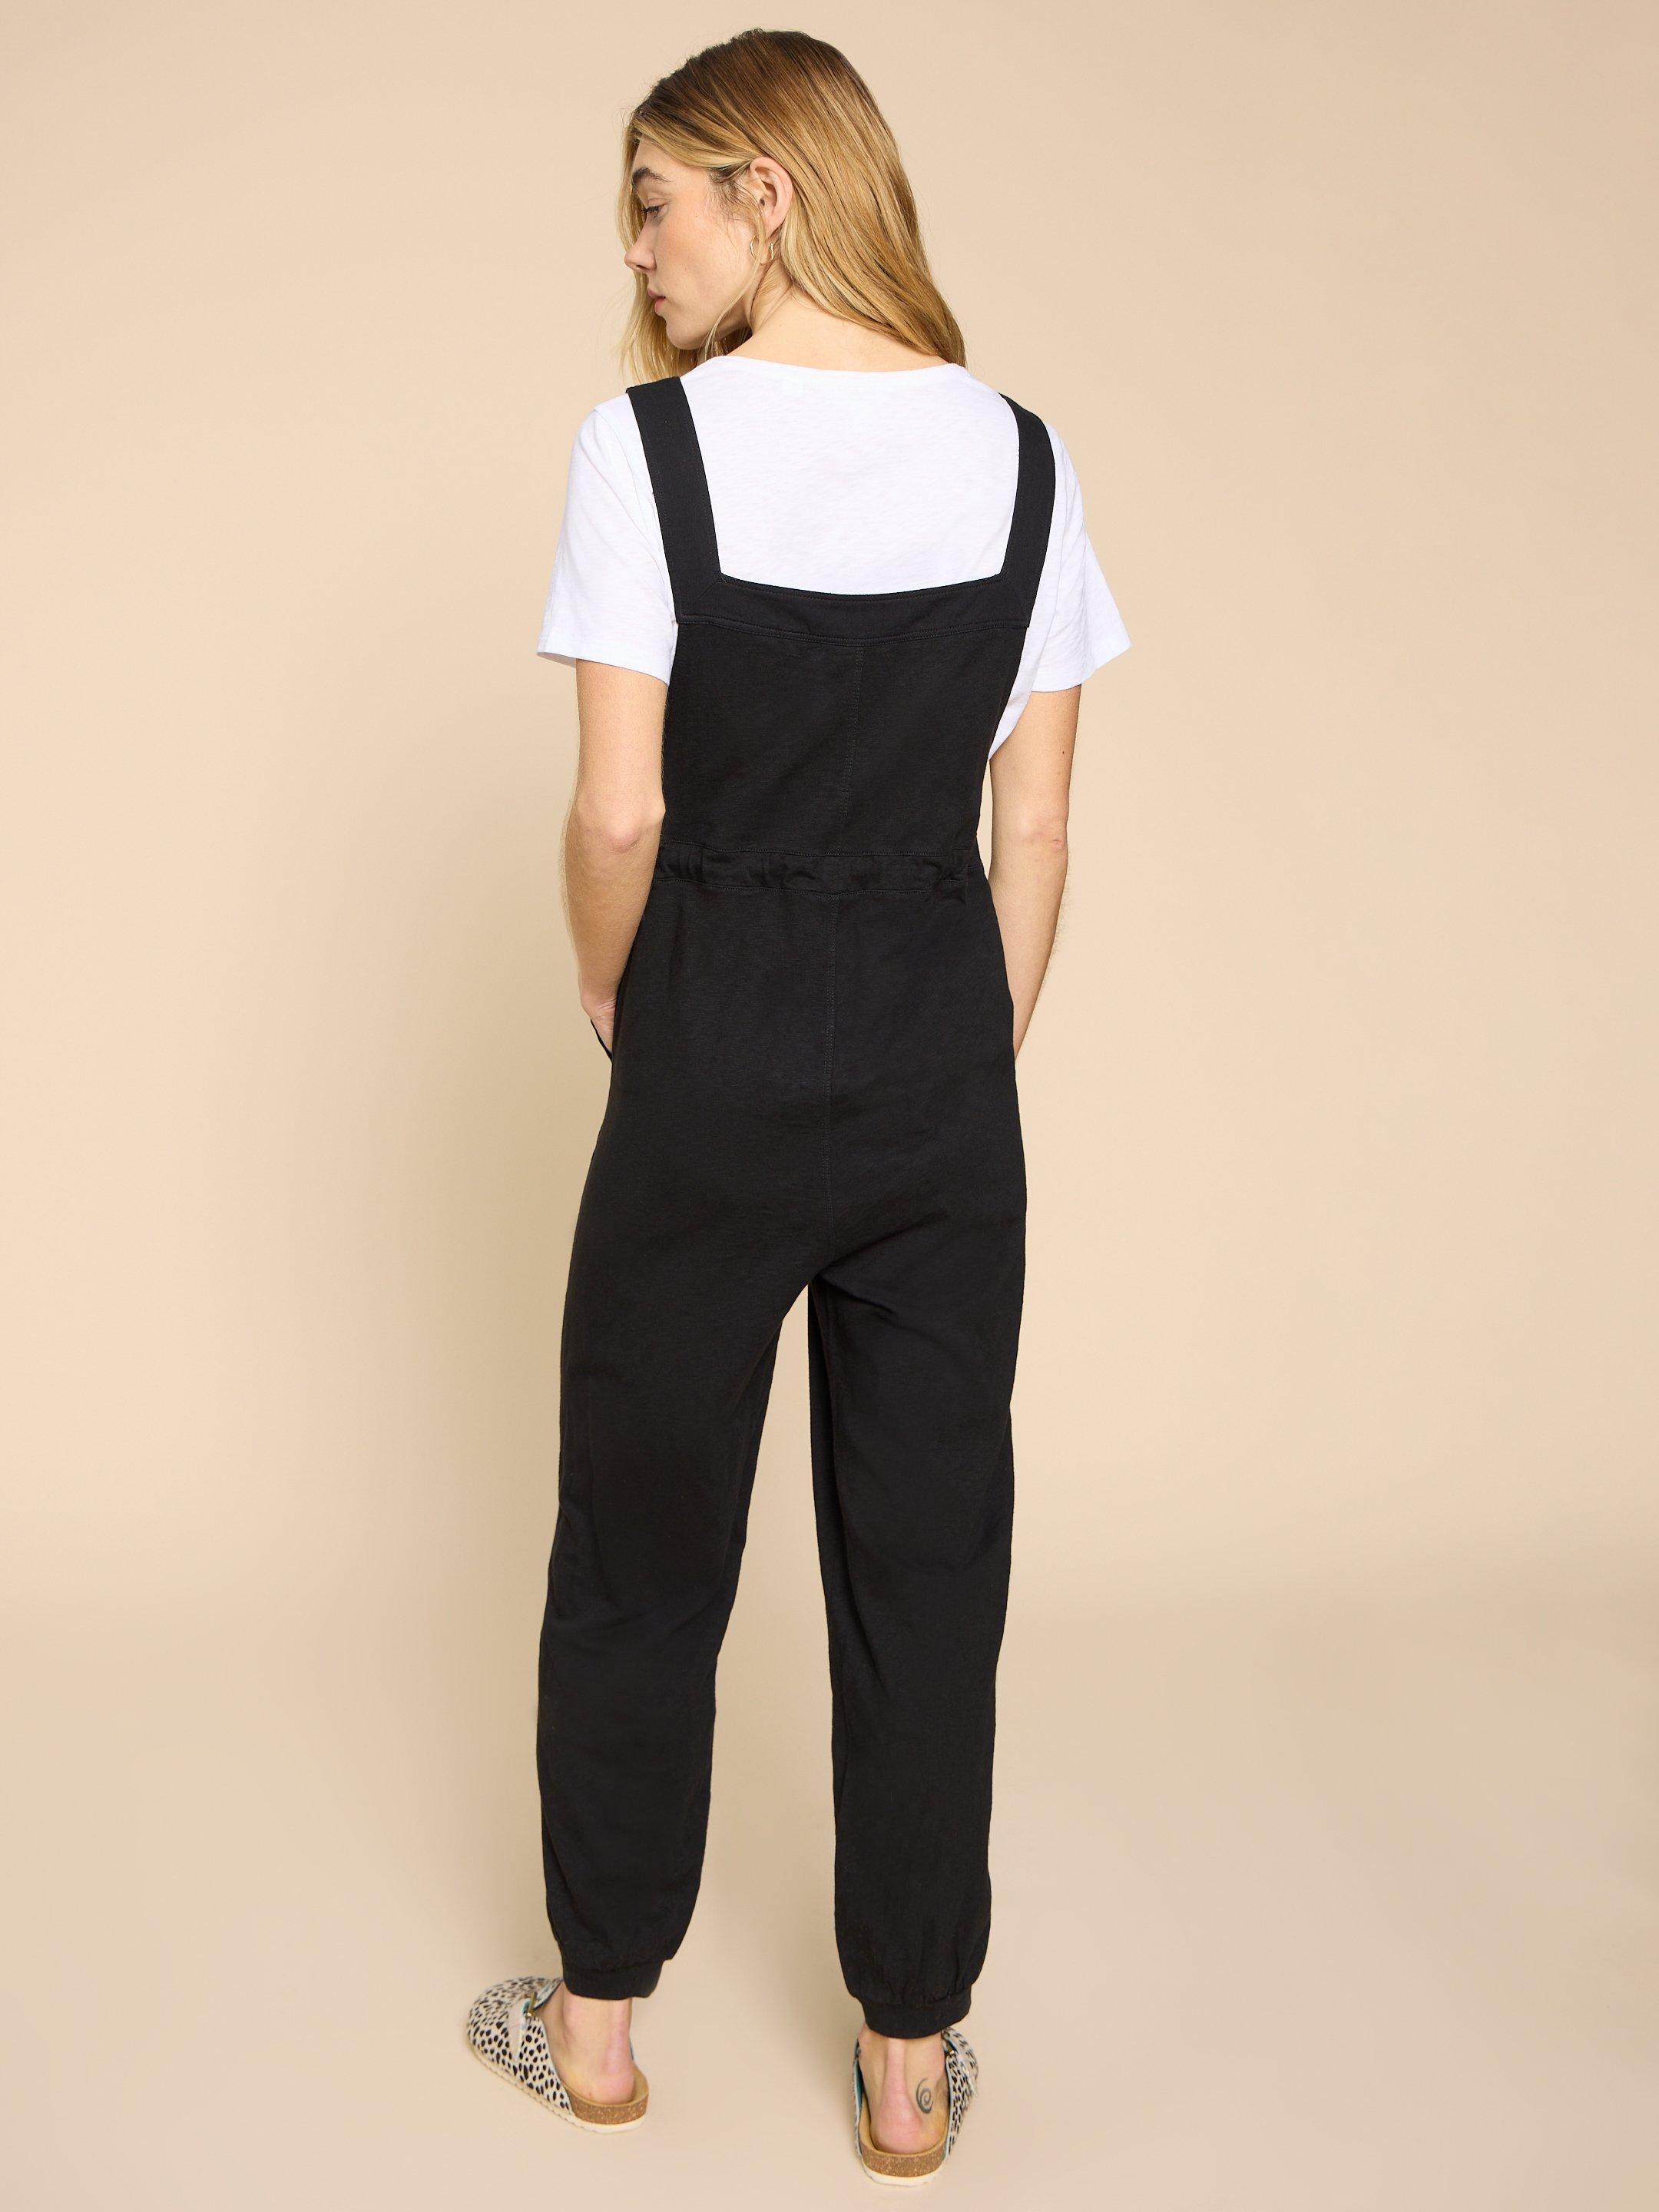 Daphne Jersey Dungaree in PURE BLK - MODEL BACK